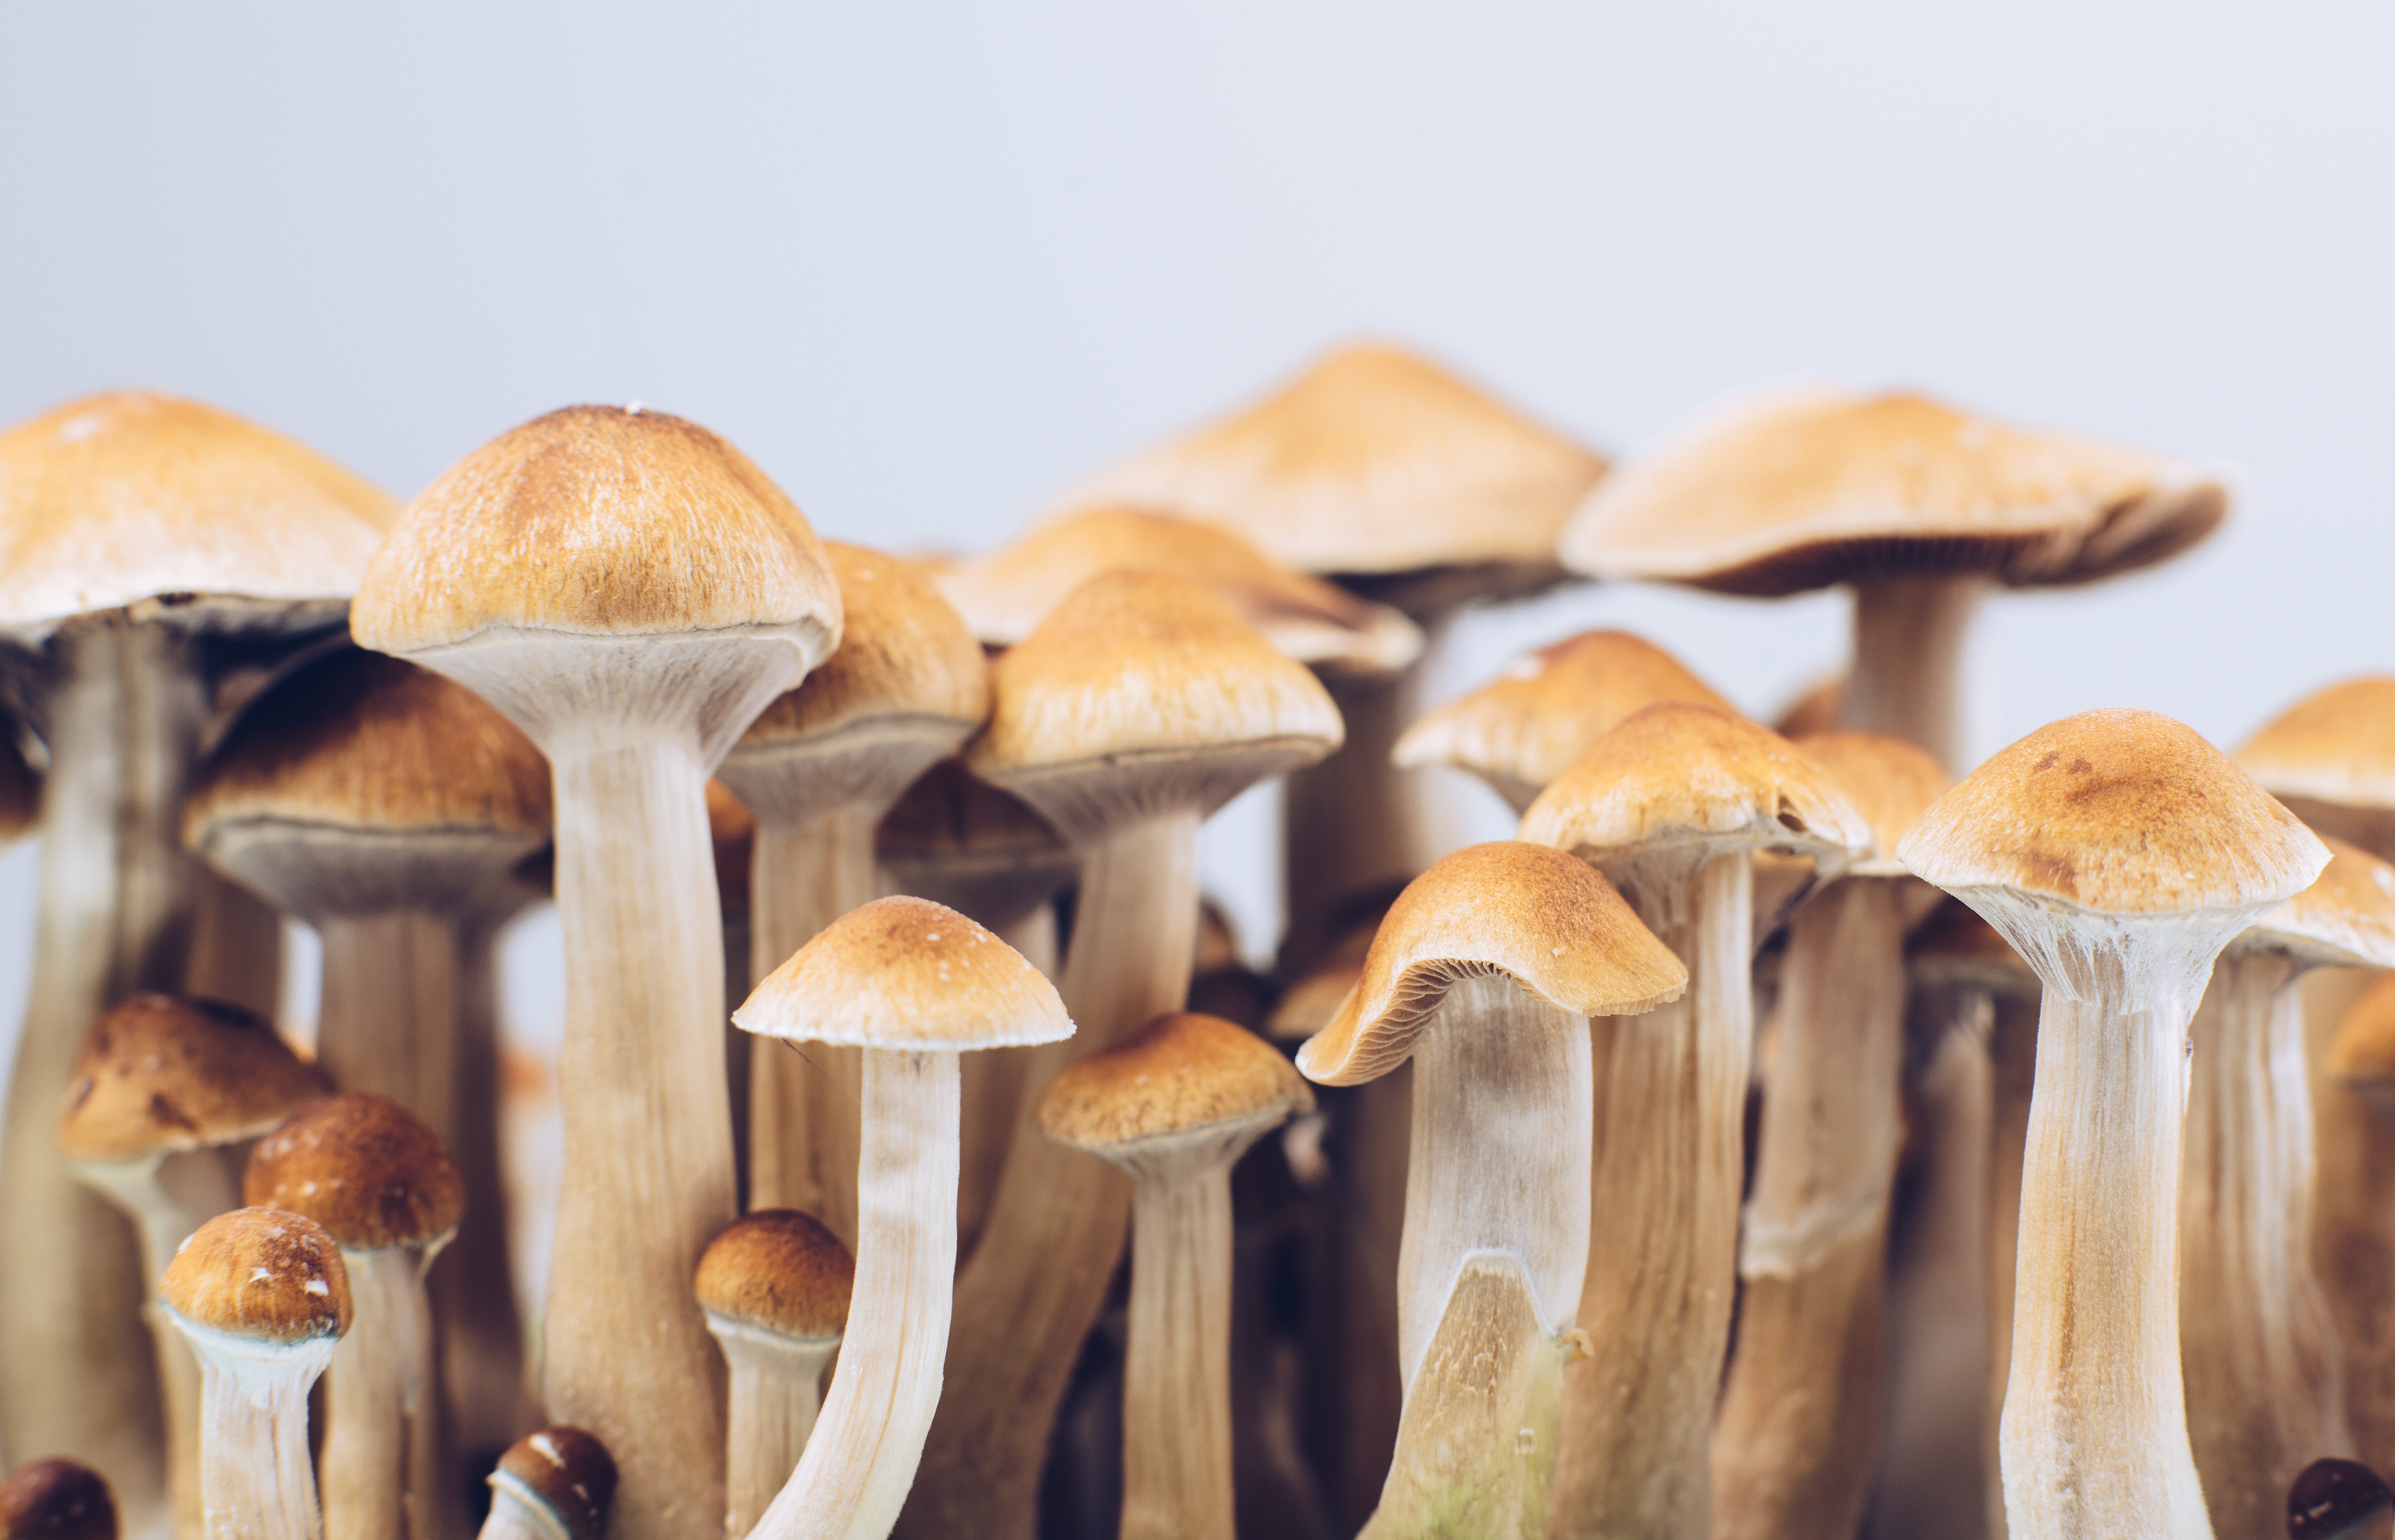 Magic mushrooms were among the drugs people used to ‘microdose’.